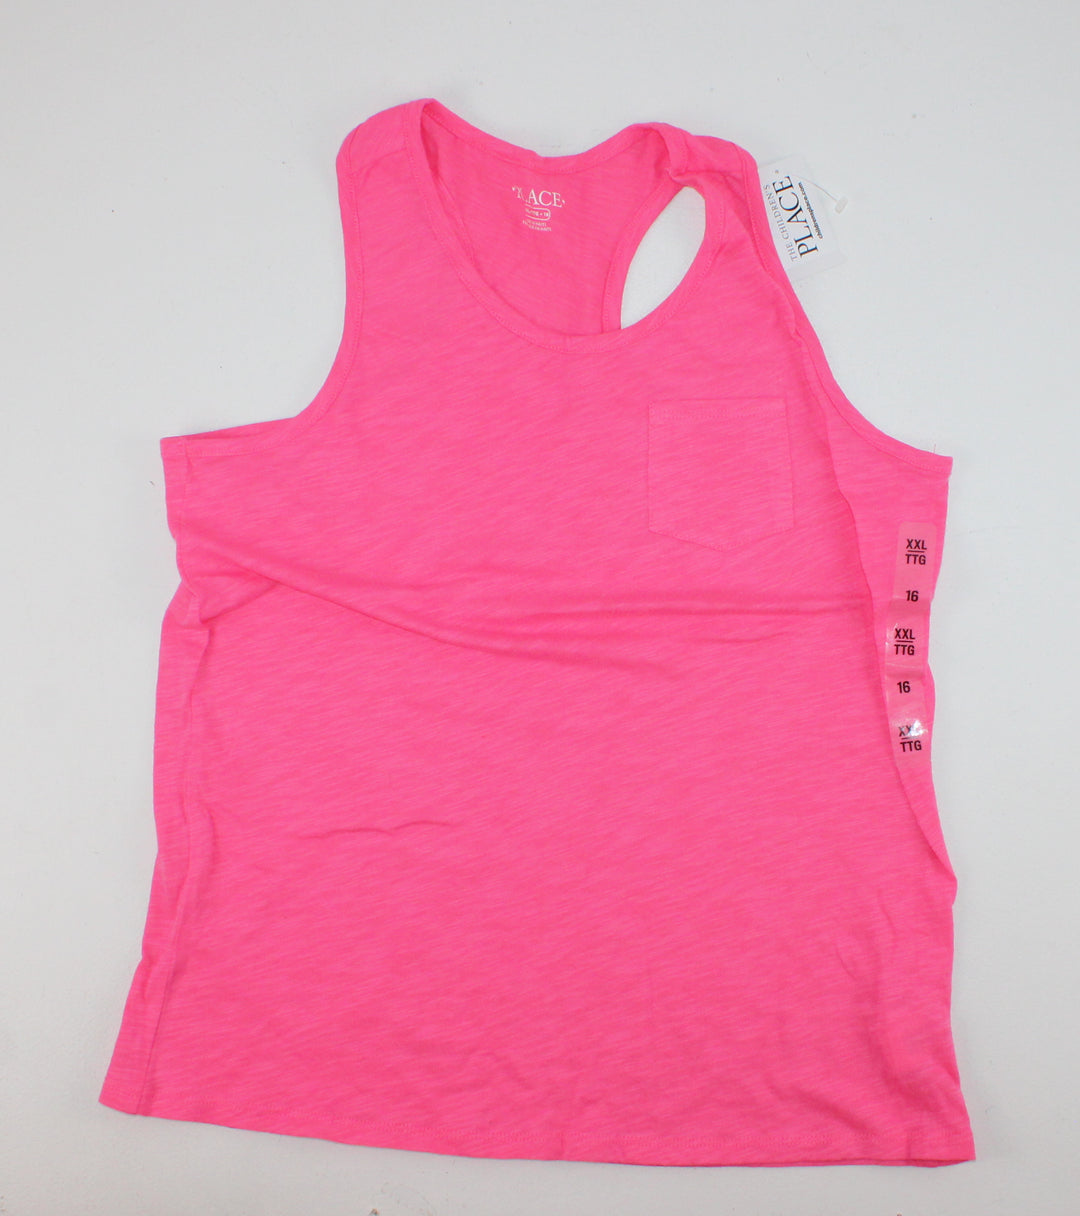 CHILDRENS PLACE PINK RACER BACK TANK 16 NEW!